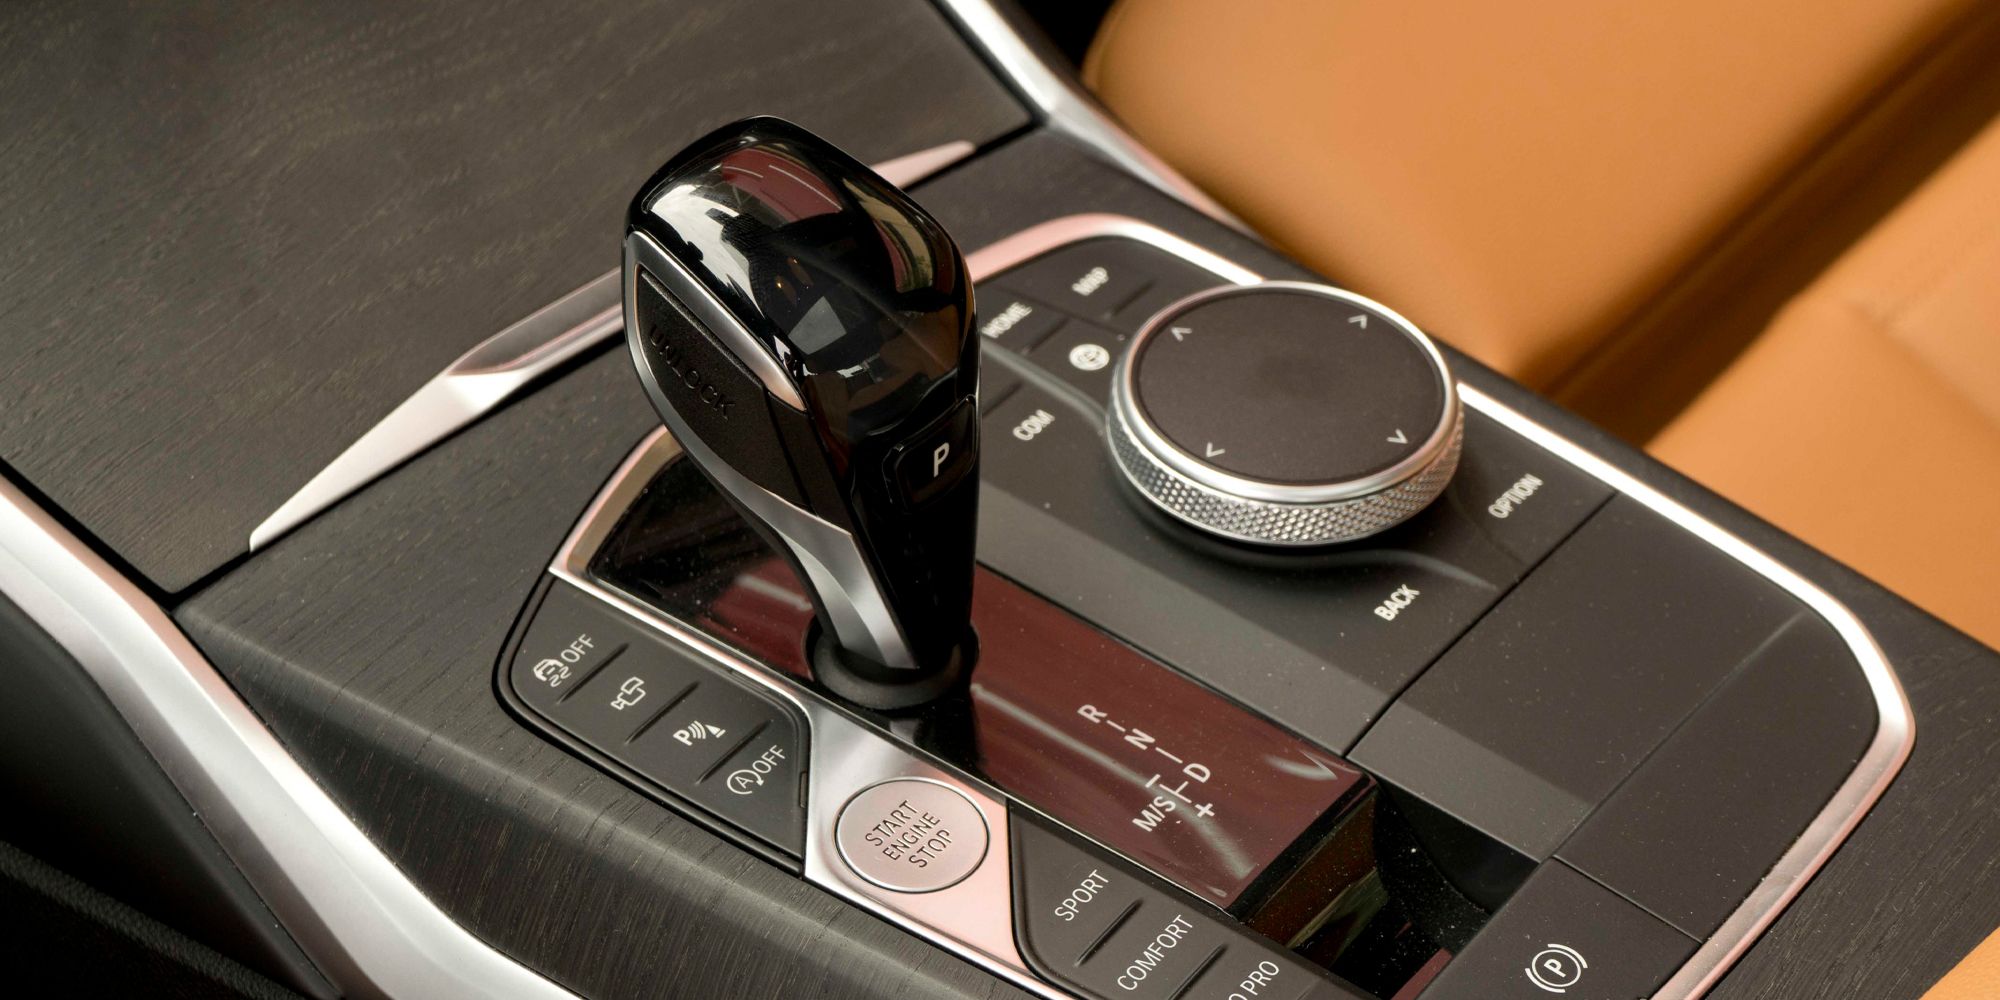 The M340i's shifter